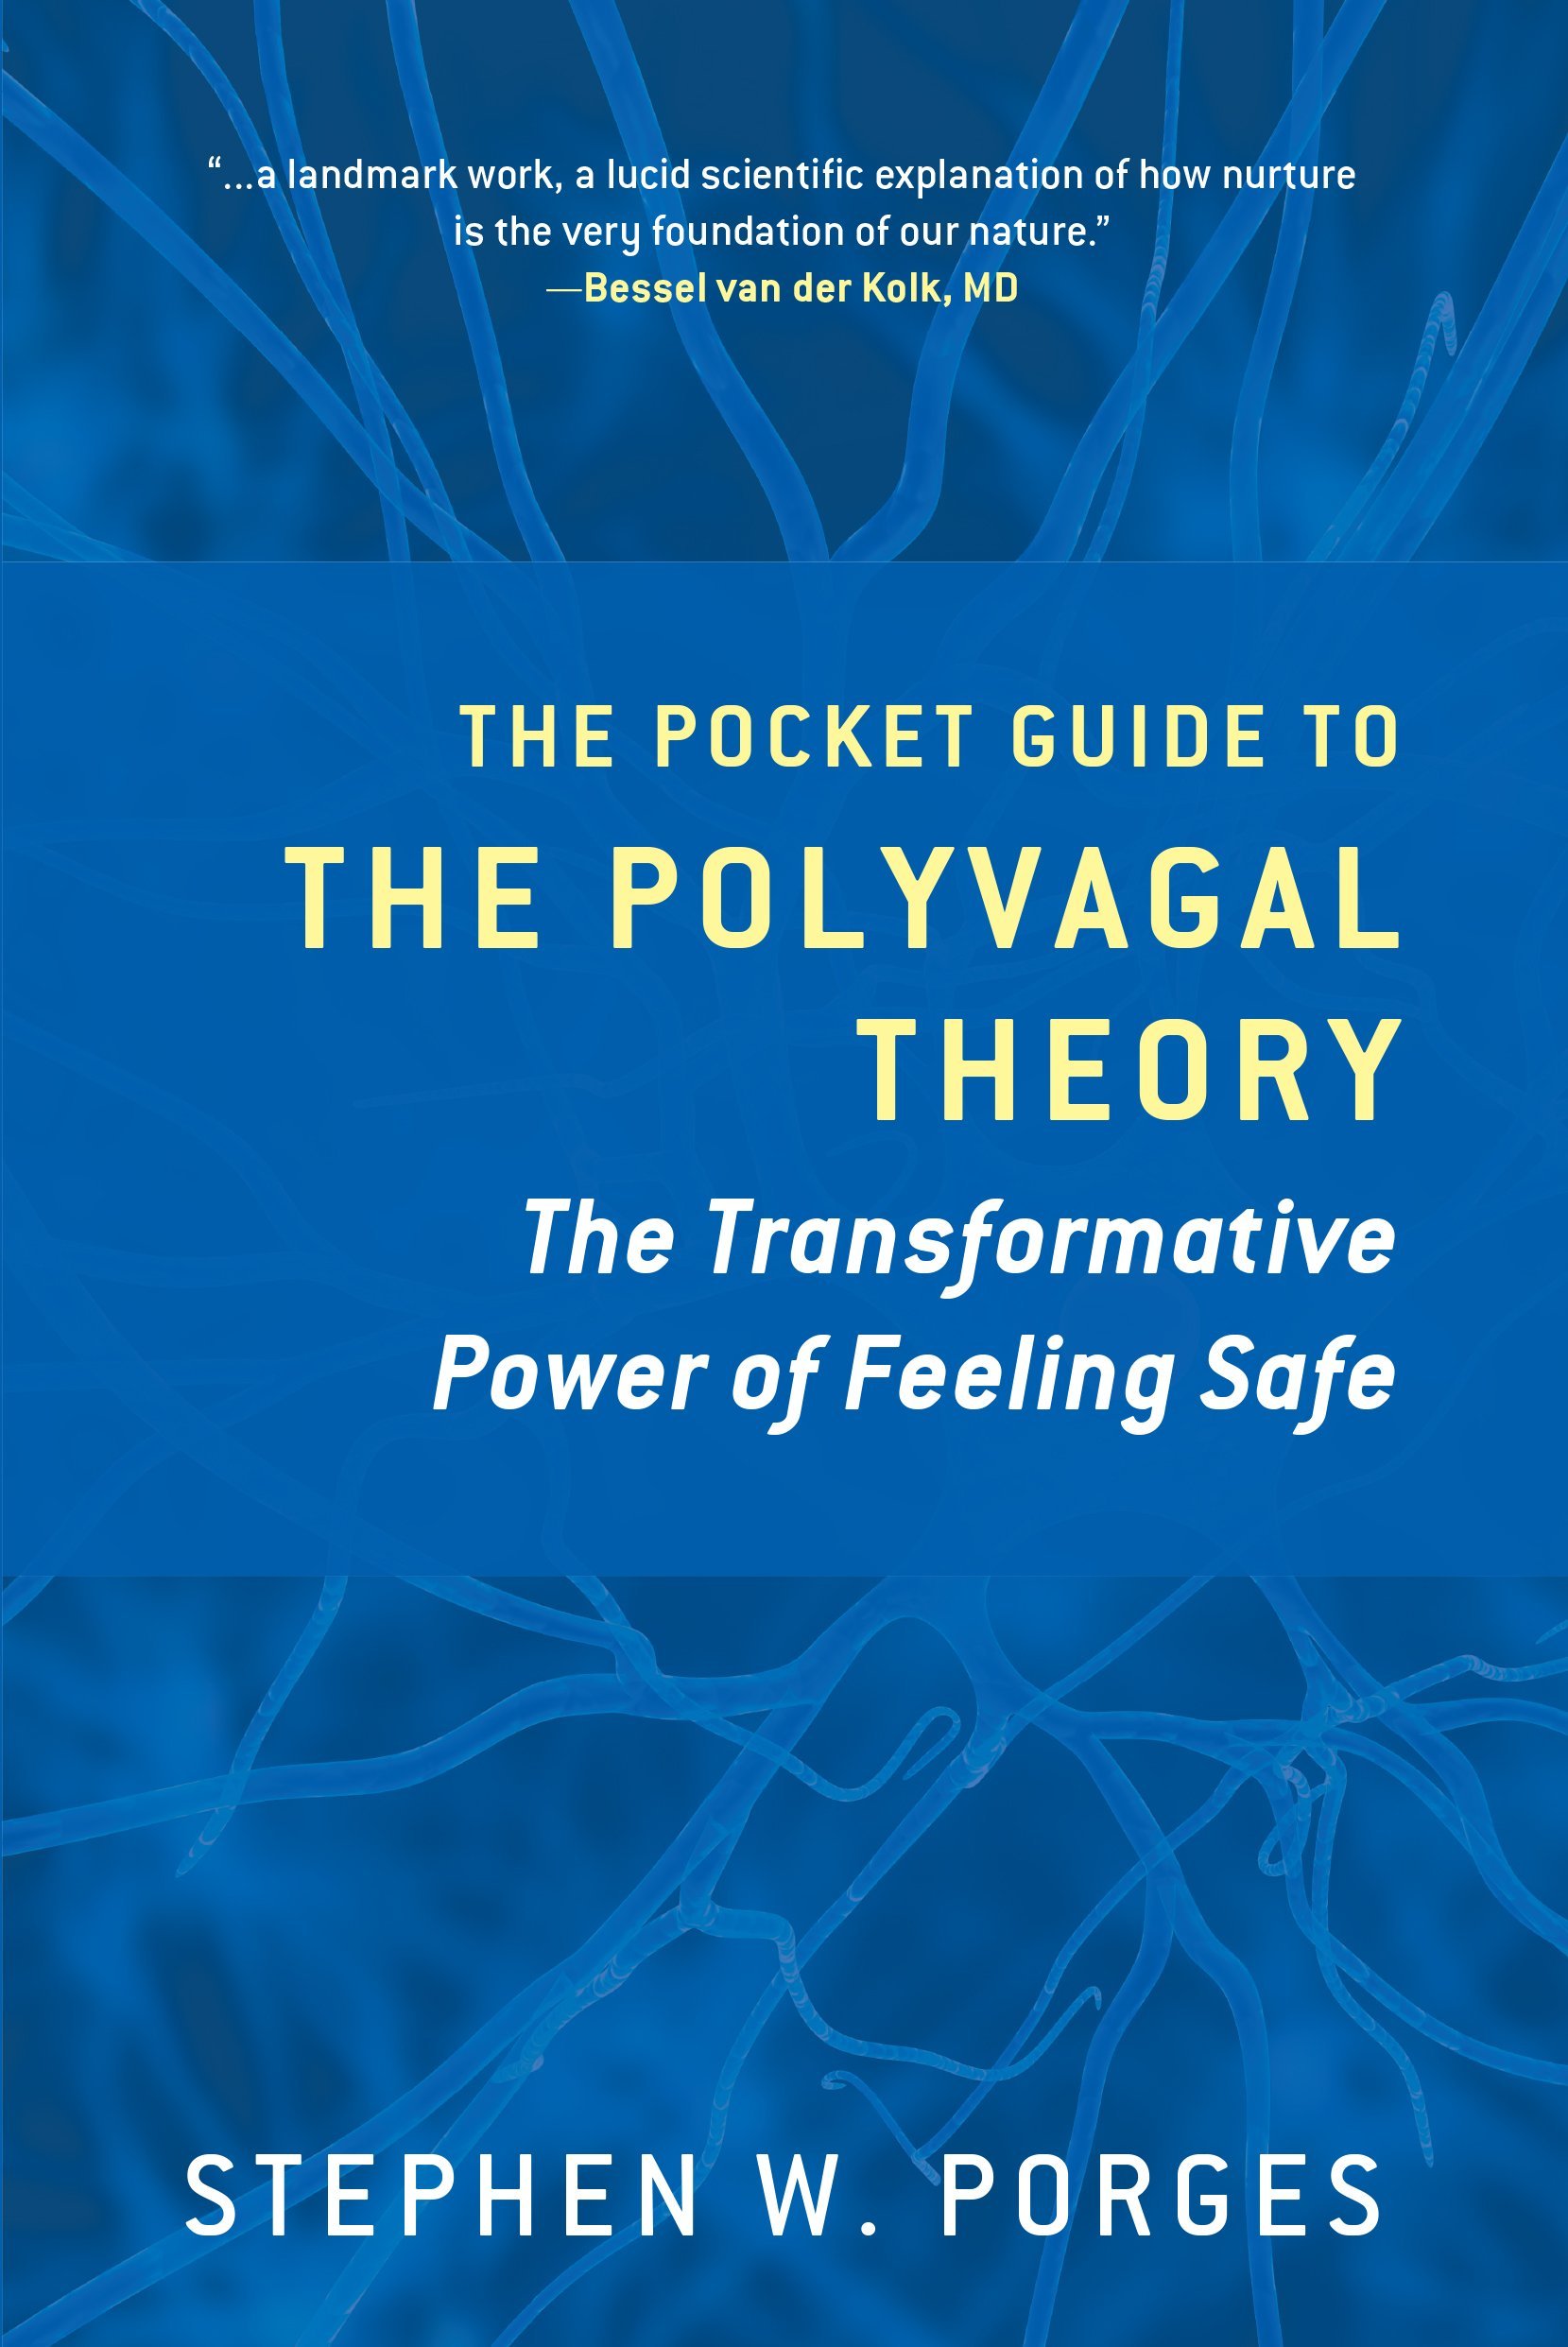 The Pocket Guide to the Polyvagal Theory: The Transformative Power of Feeling Safe by Stephen Porges